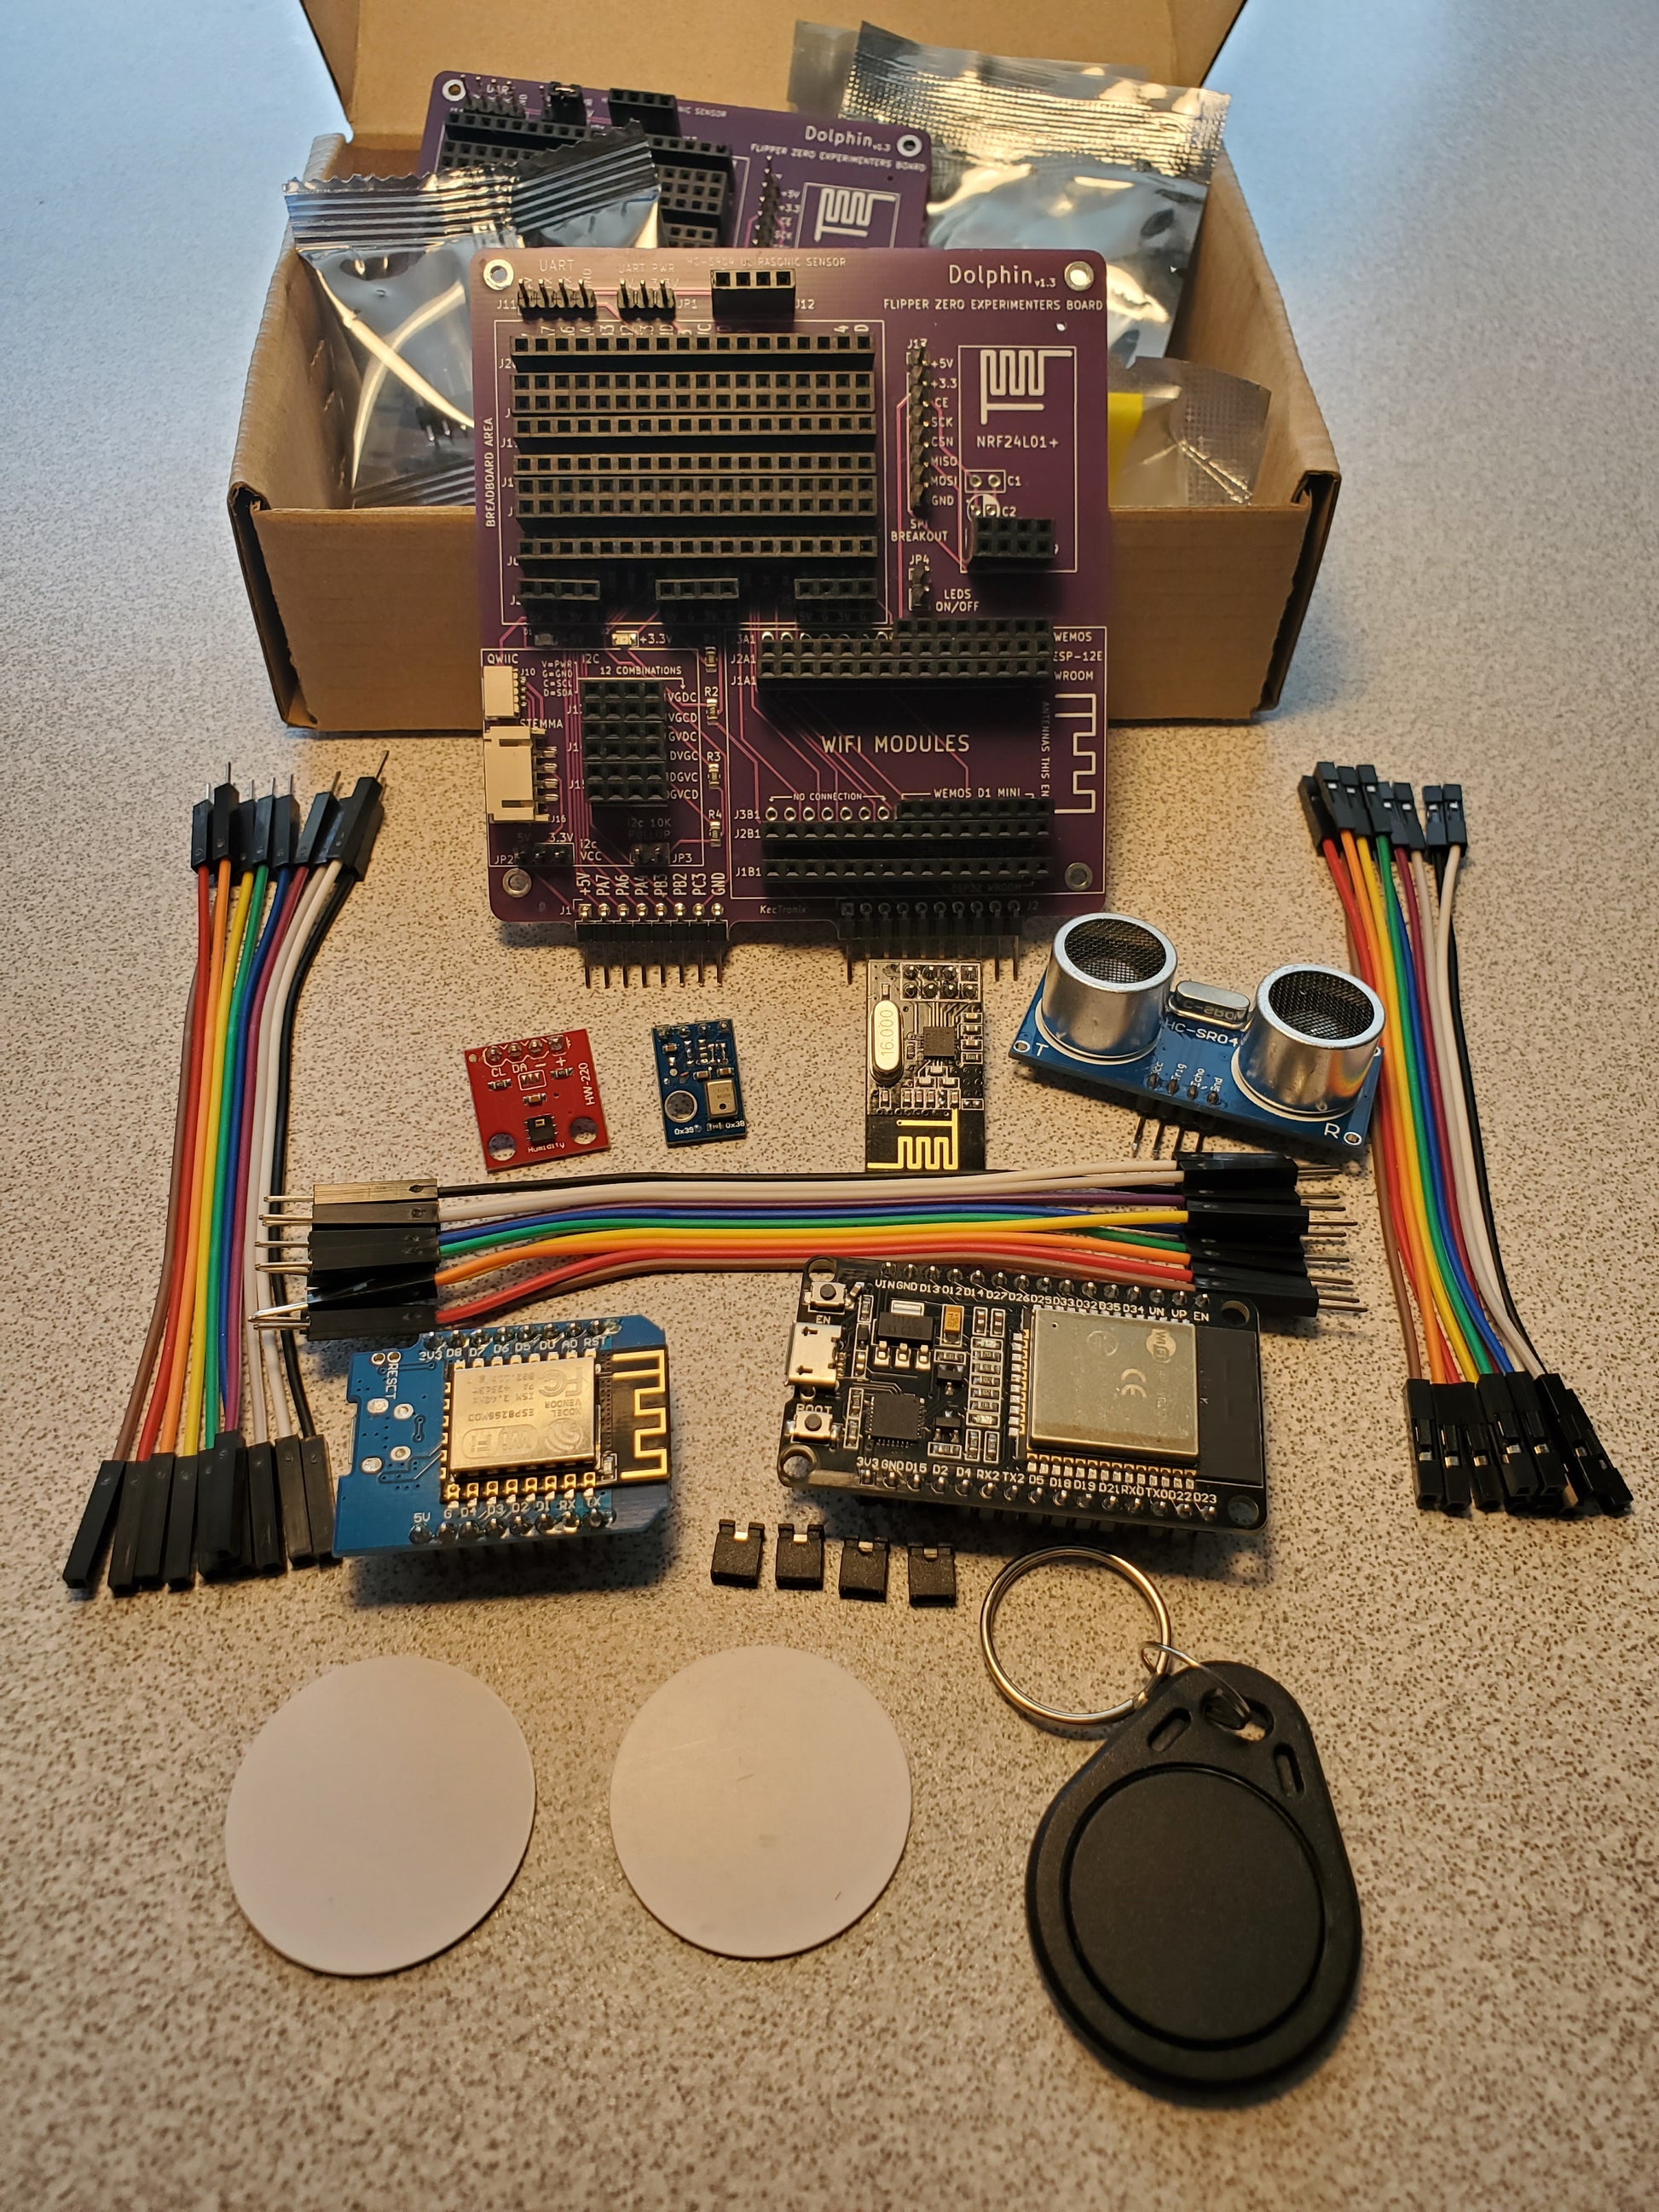 The complete kit shown spread out and what it looks like in the package